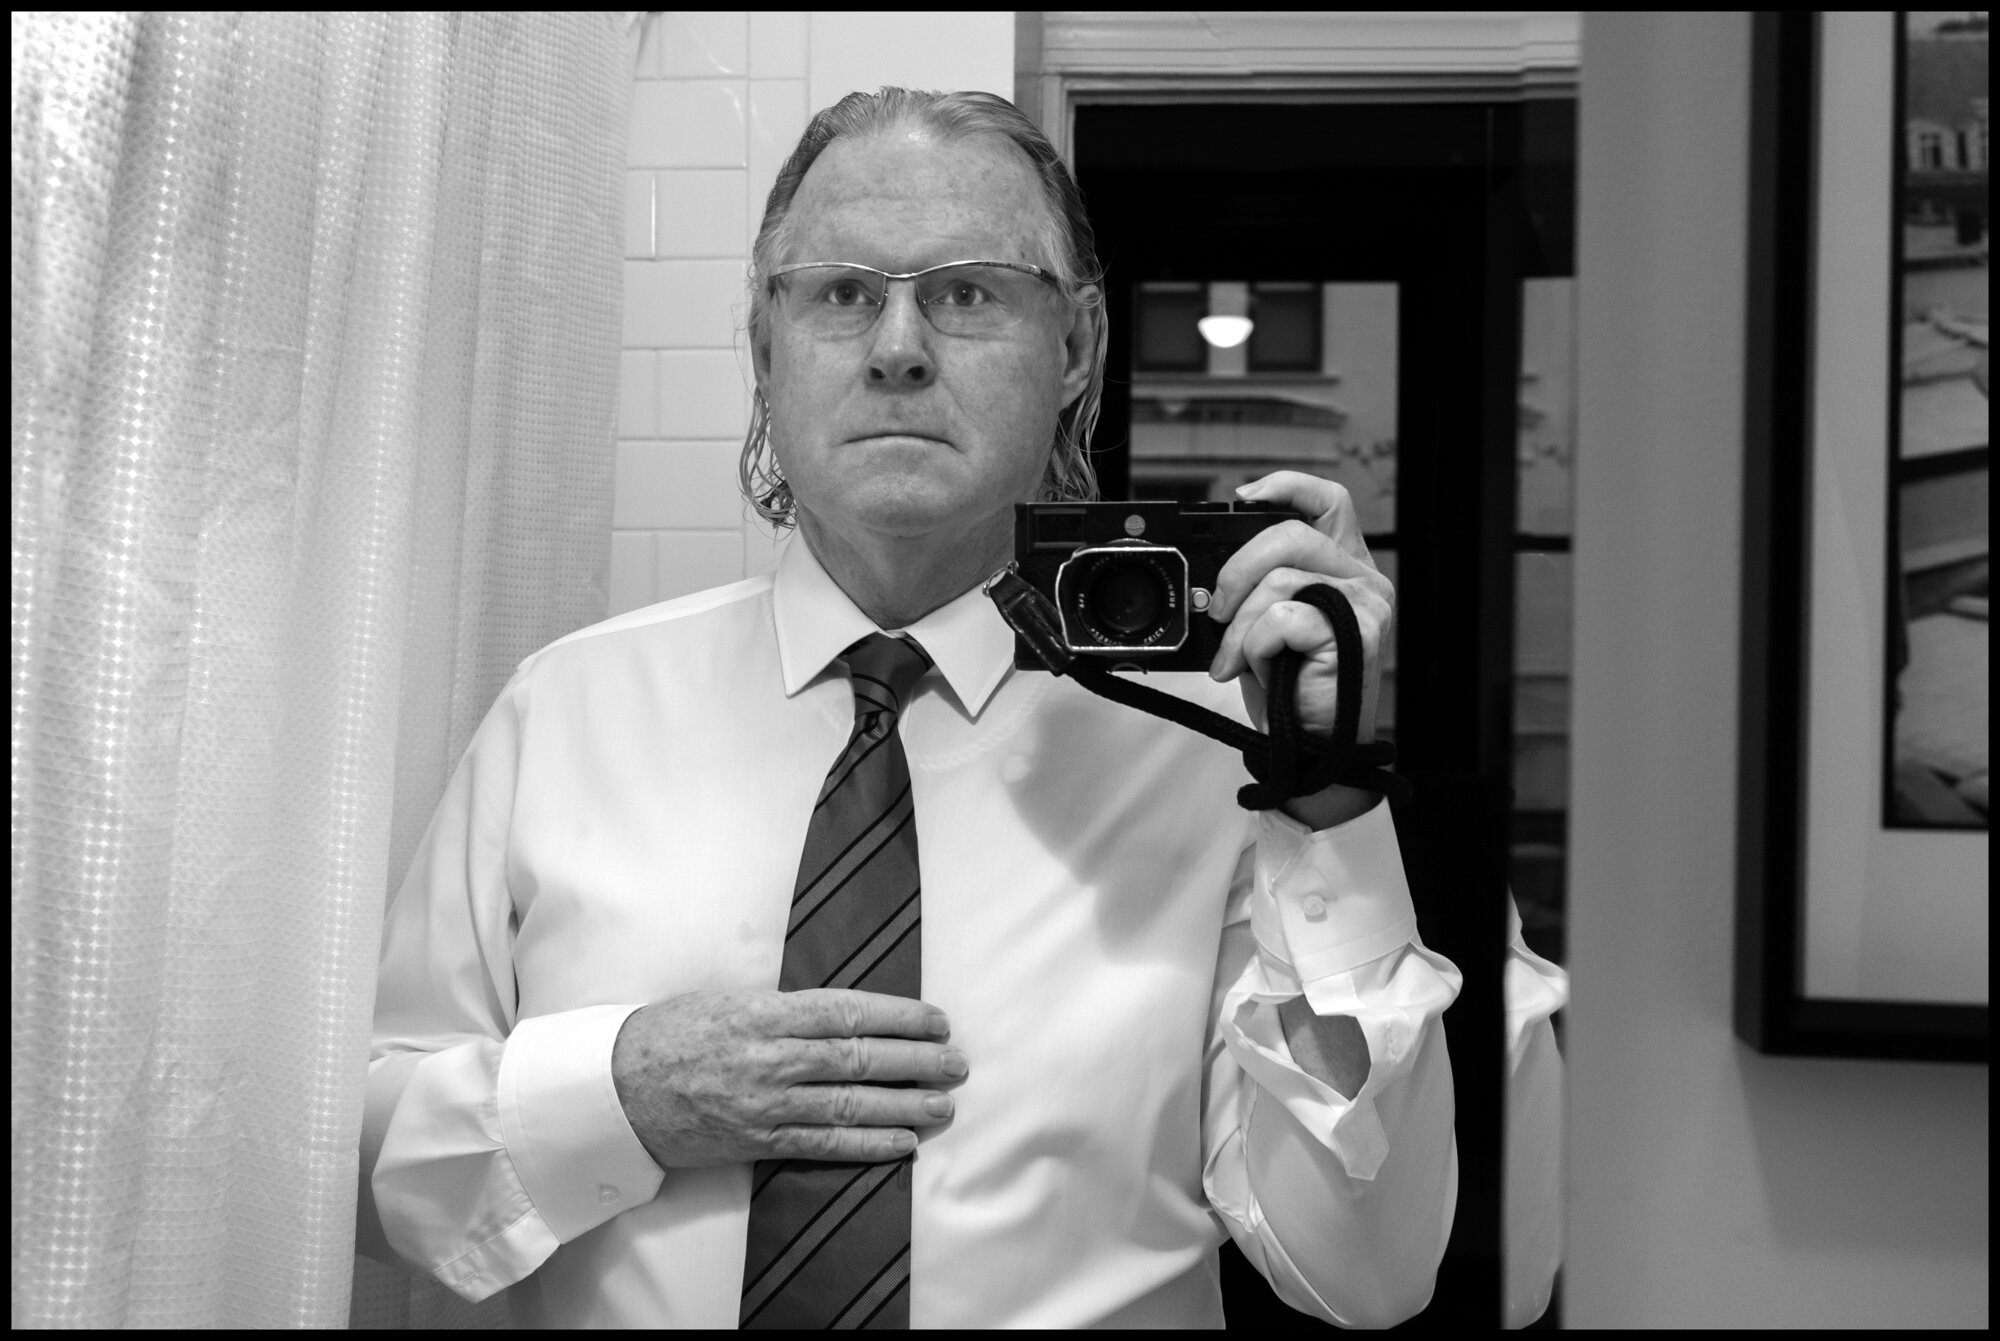  Self portrait. Peter Turnley, 6am, preparing to go to the funeral of Anthony, “Tony”, Thomas, a legendary New York Paramedic who died ofCovid-19 related causes, in Bay Ridge, Brookly, New York.   April 31, 2020. © Peter Turnley  ID#33-001 